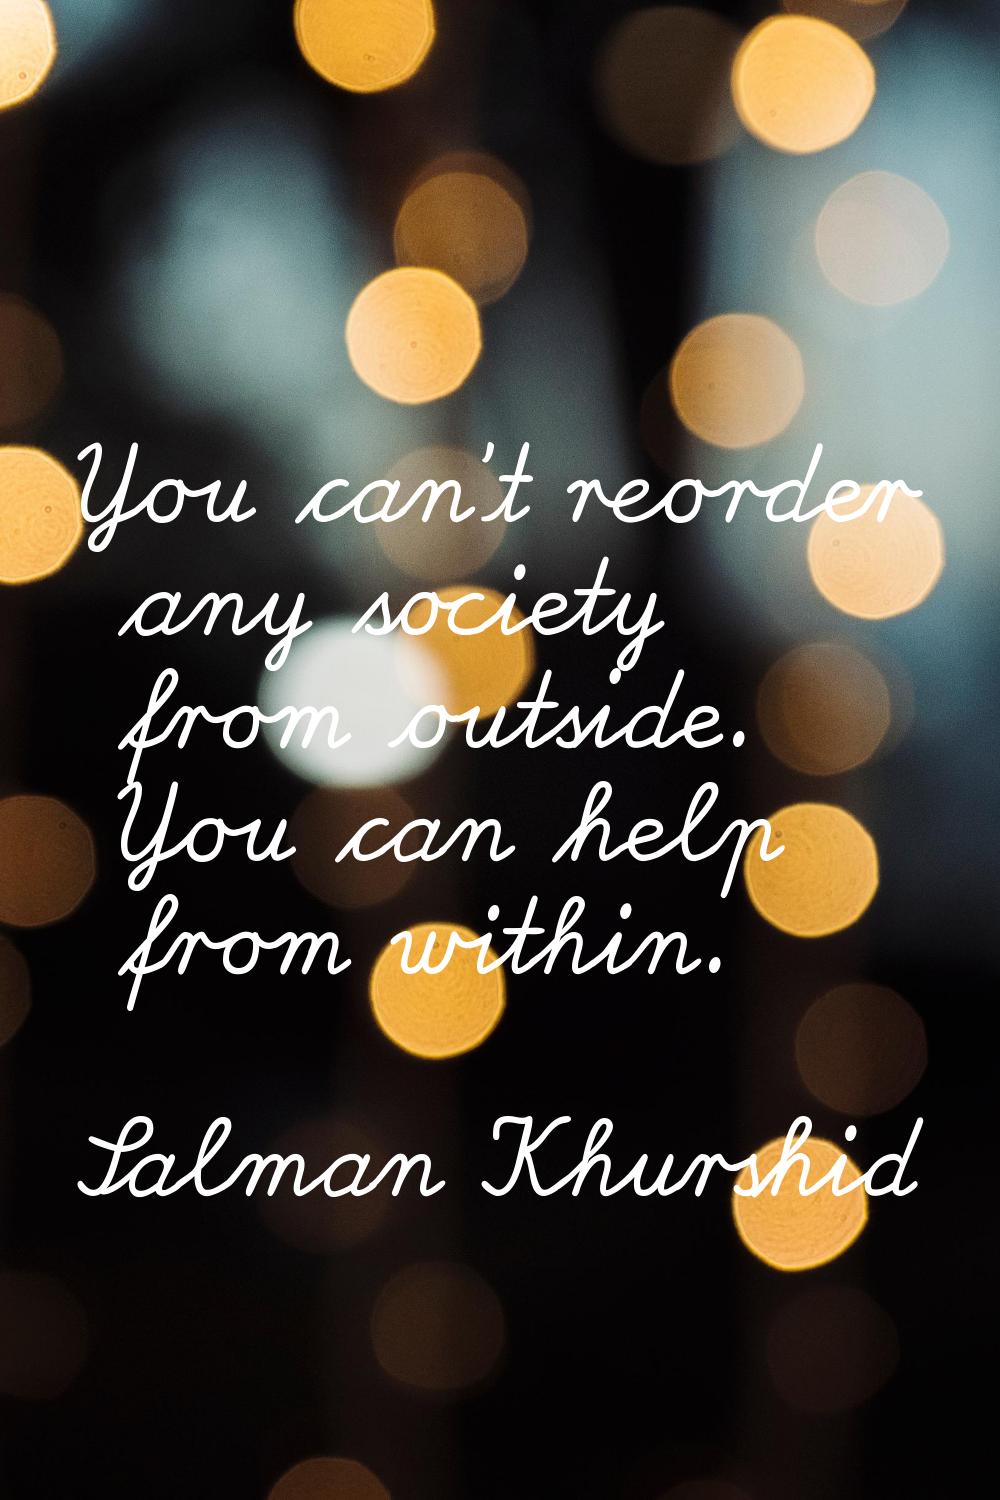 You can't reorder any society from outside. You can help from within.